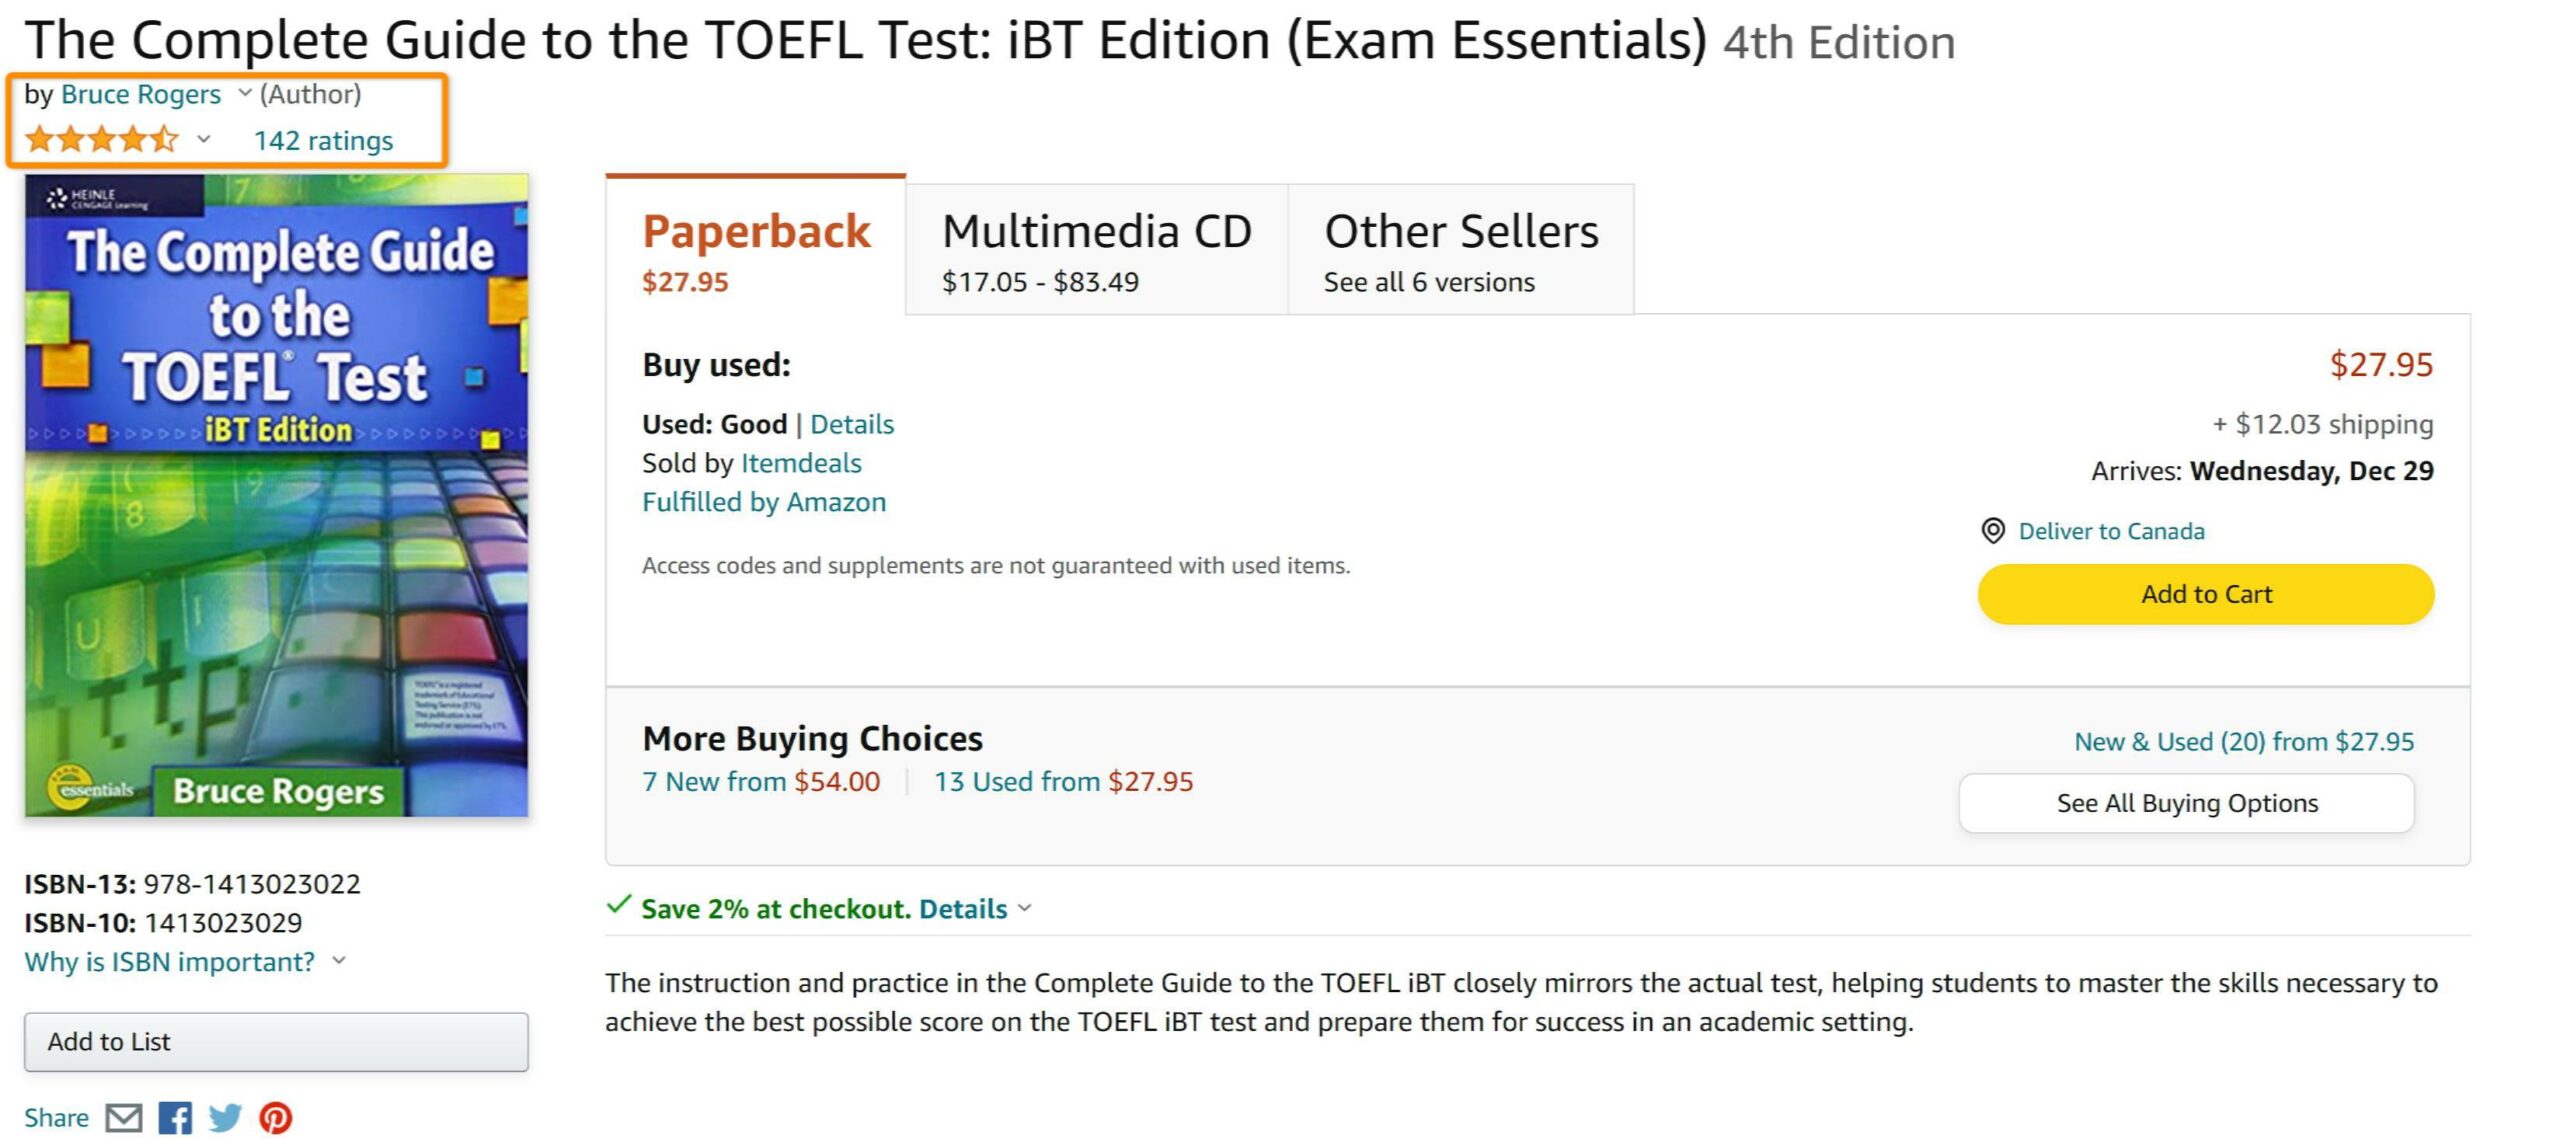 The Complete Guide to the TOEFL Test Amazon 1